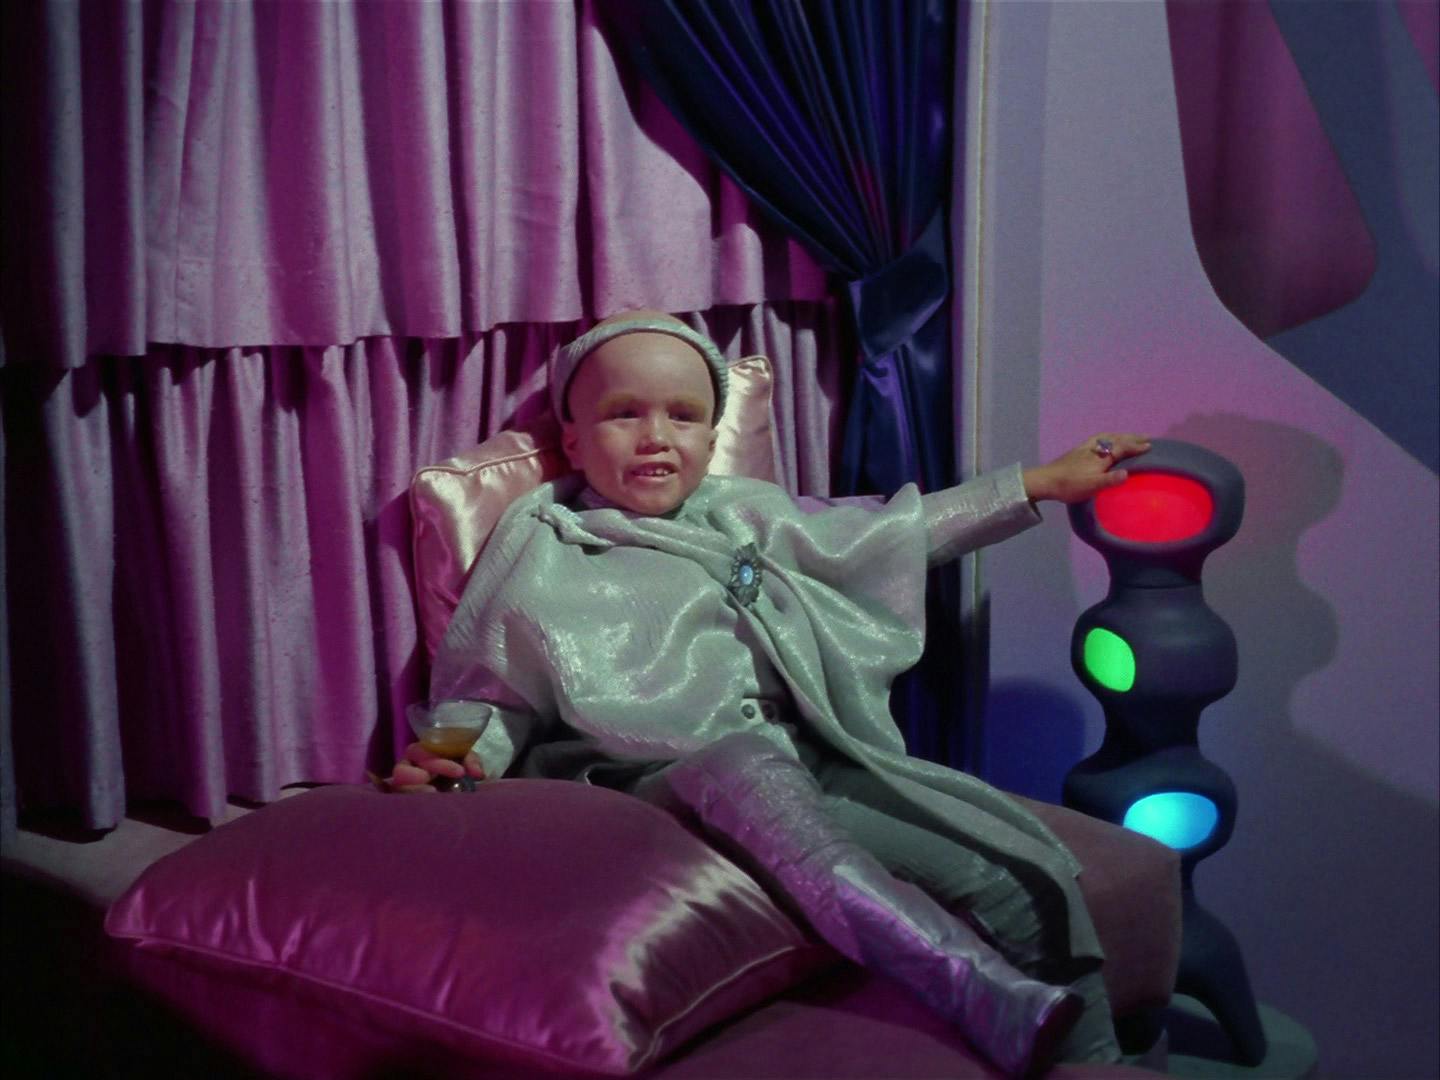 The Enterprise the real Balok is a child-like entity causing mischief with a dummy puppet in 'The Corbomite Maneuver'